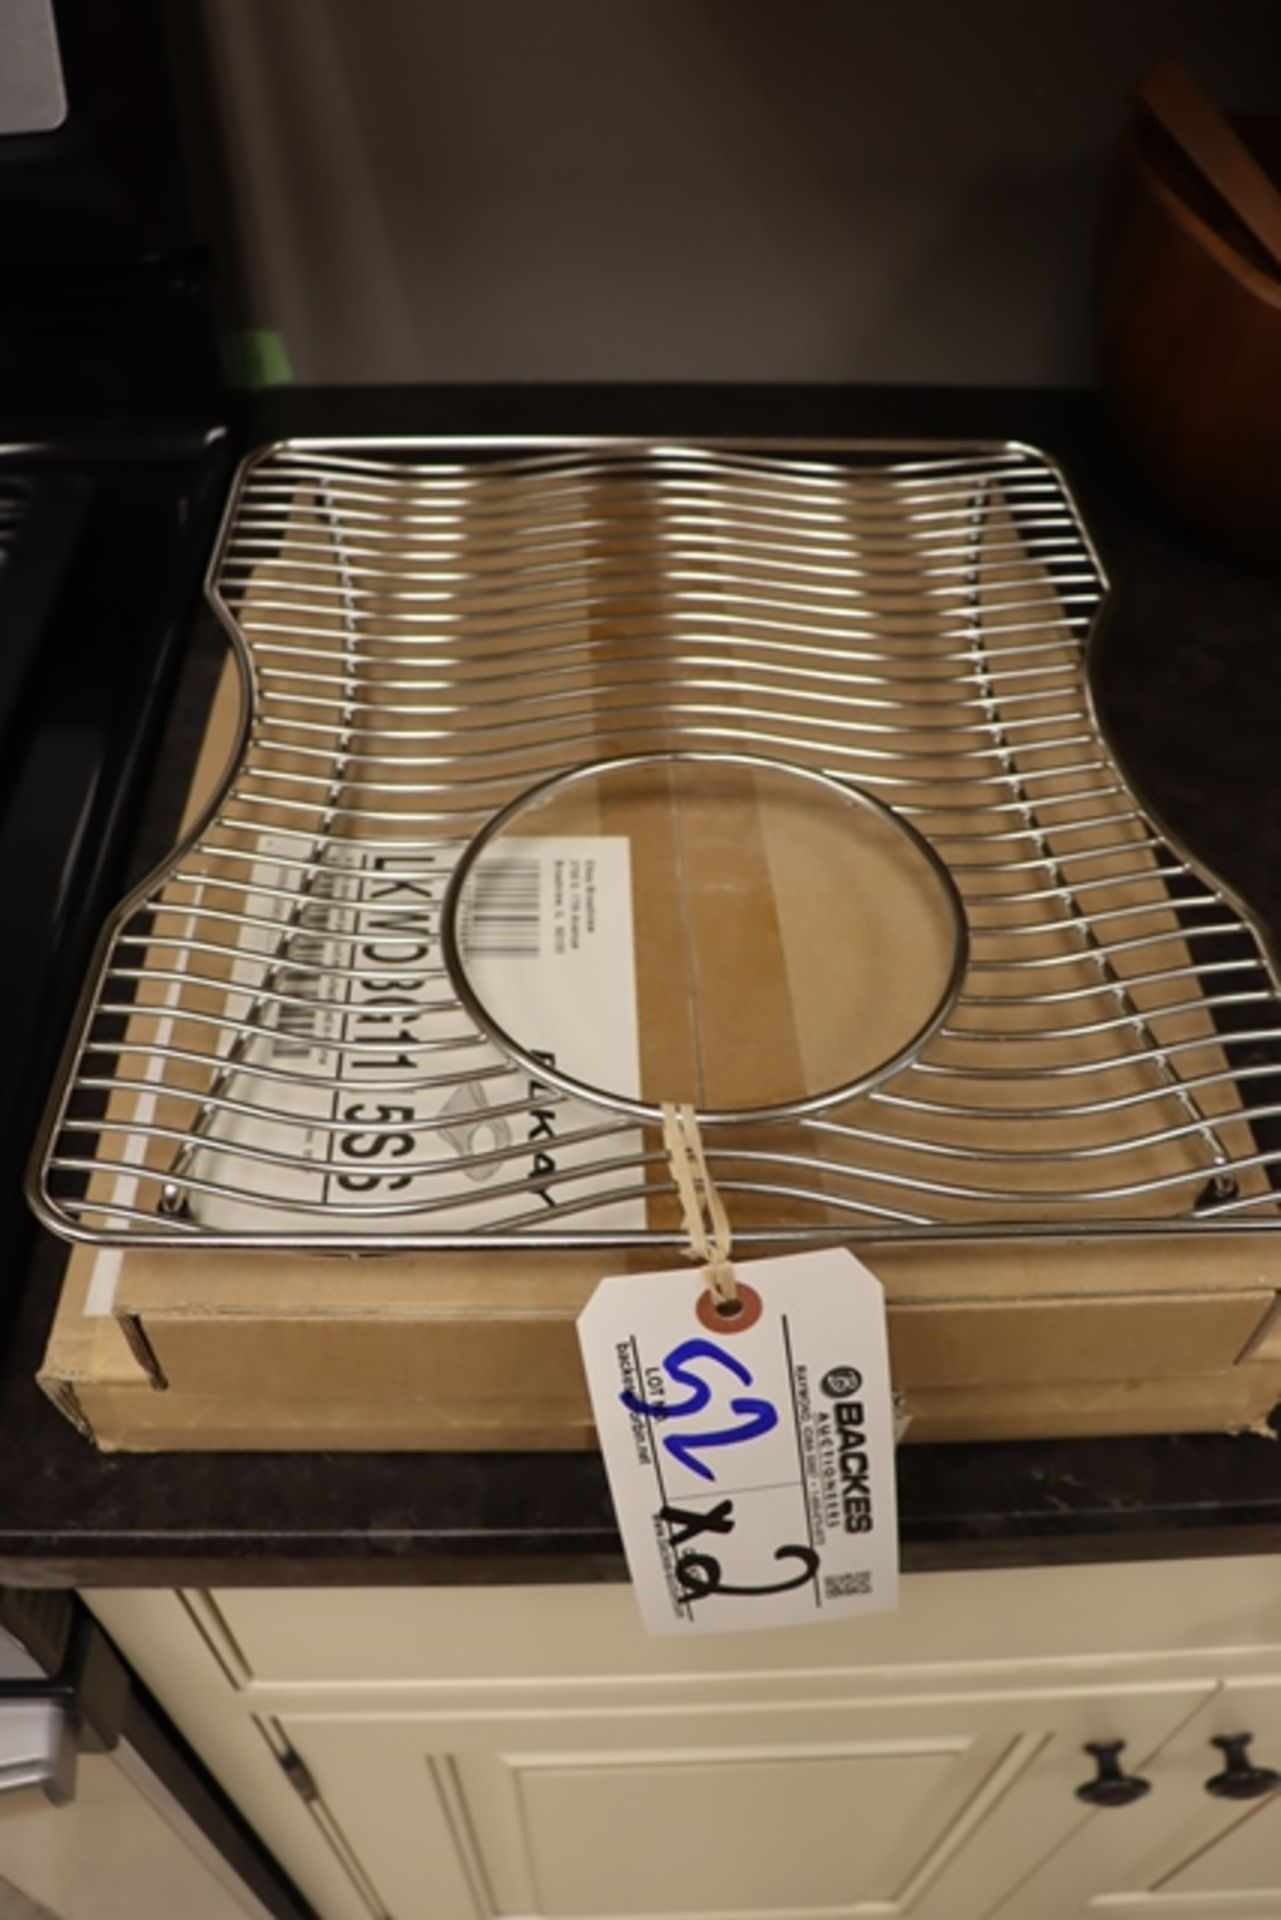 Times 2 - New Elkay 11" x 15" stainless wire sink grids